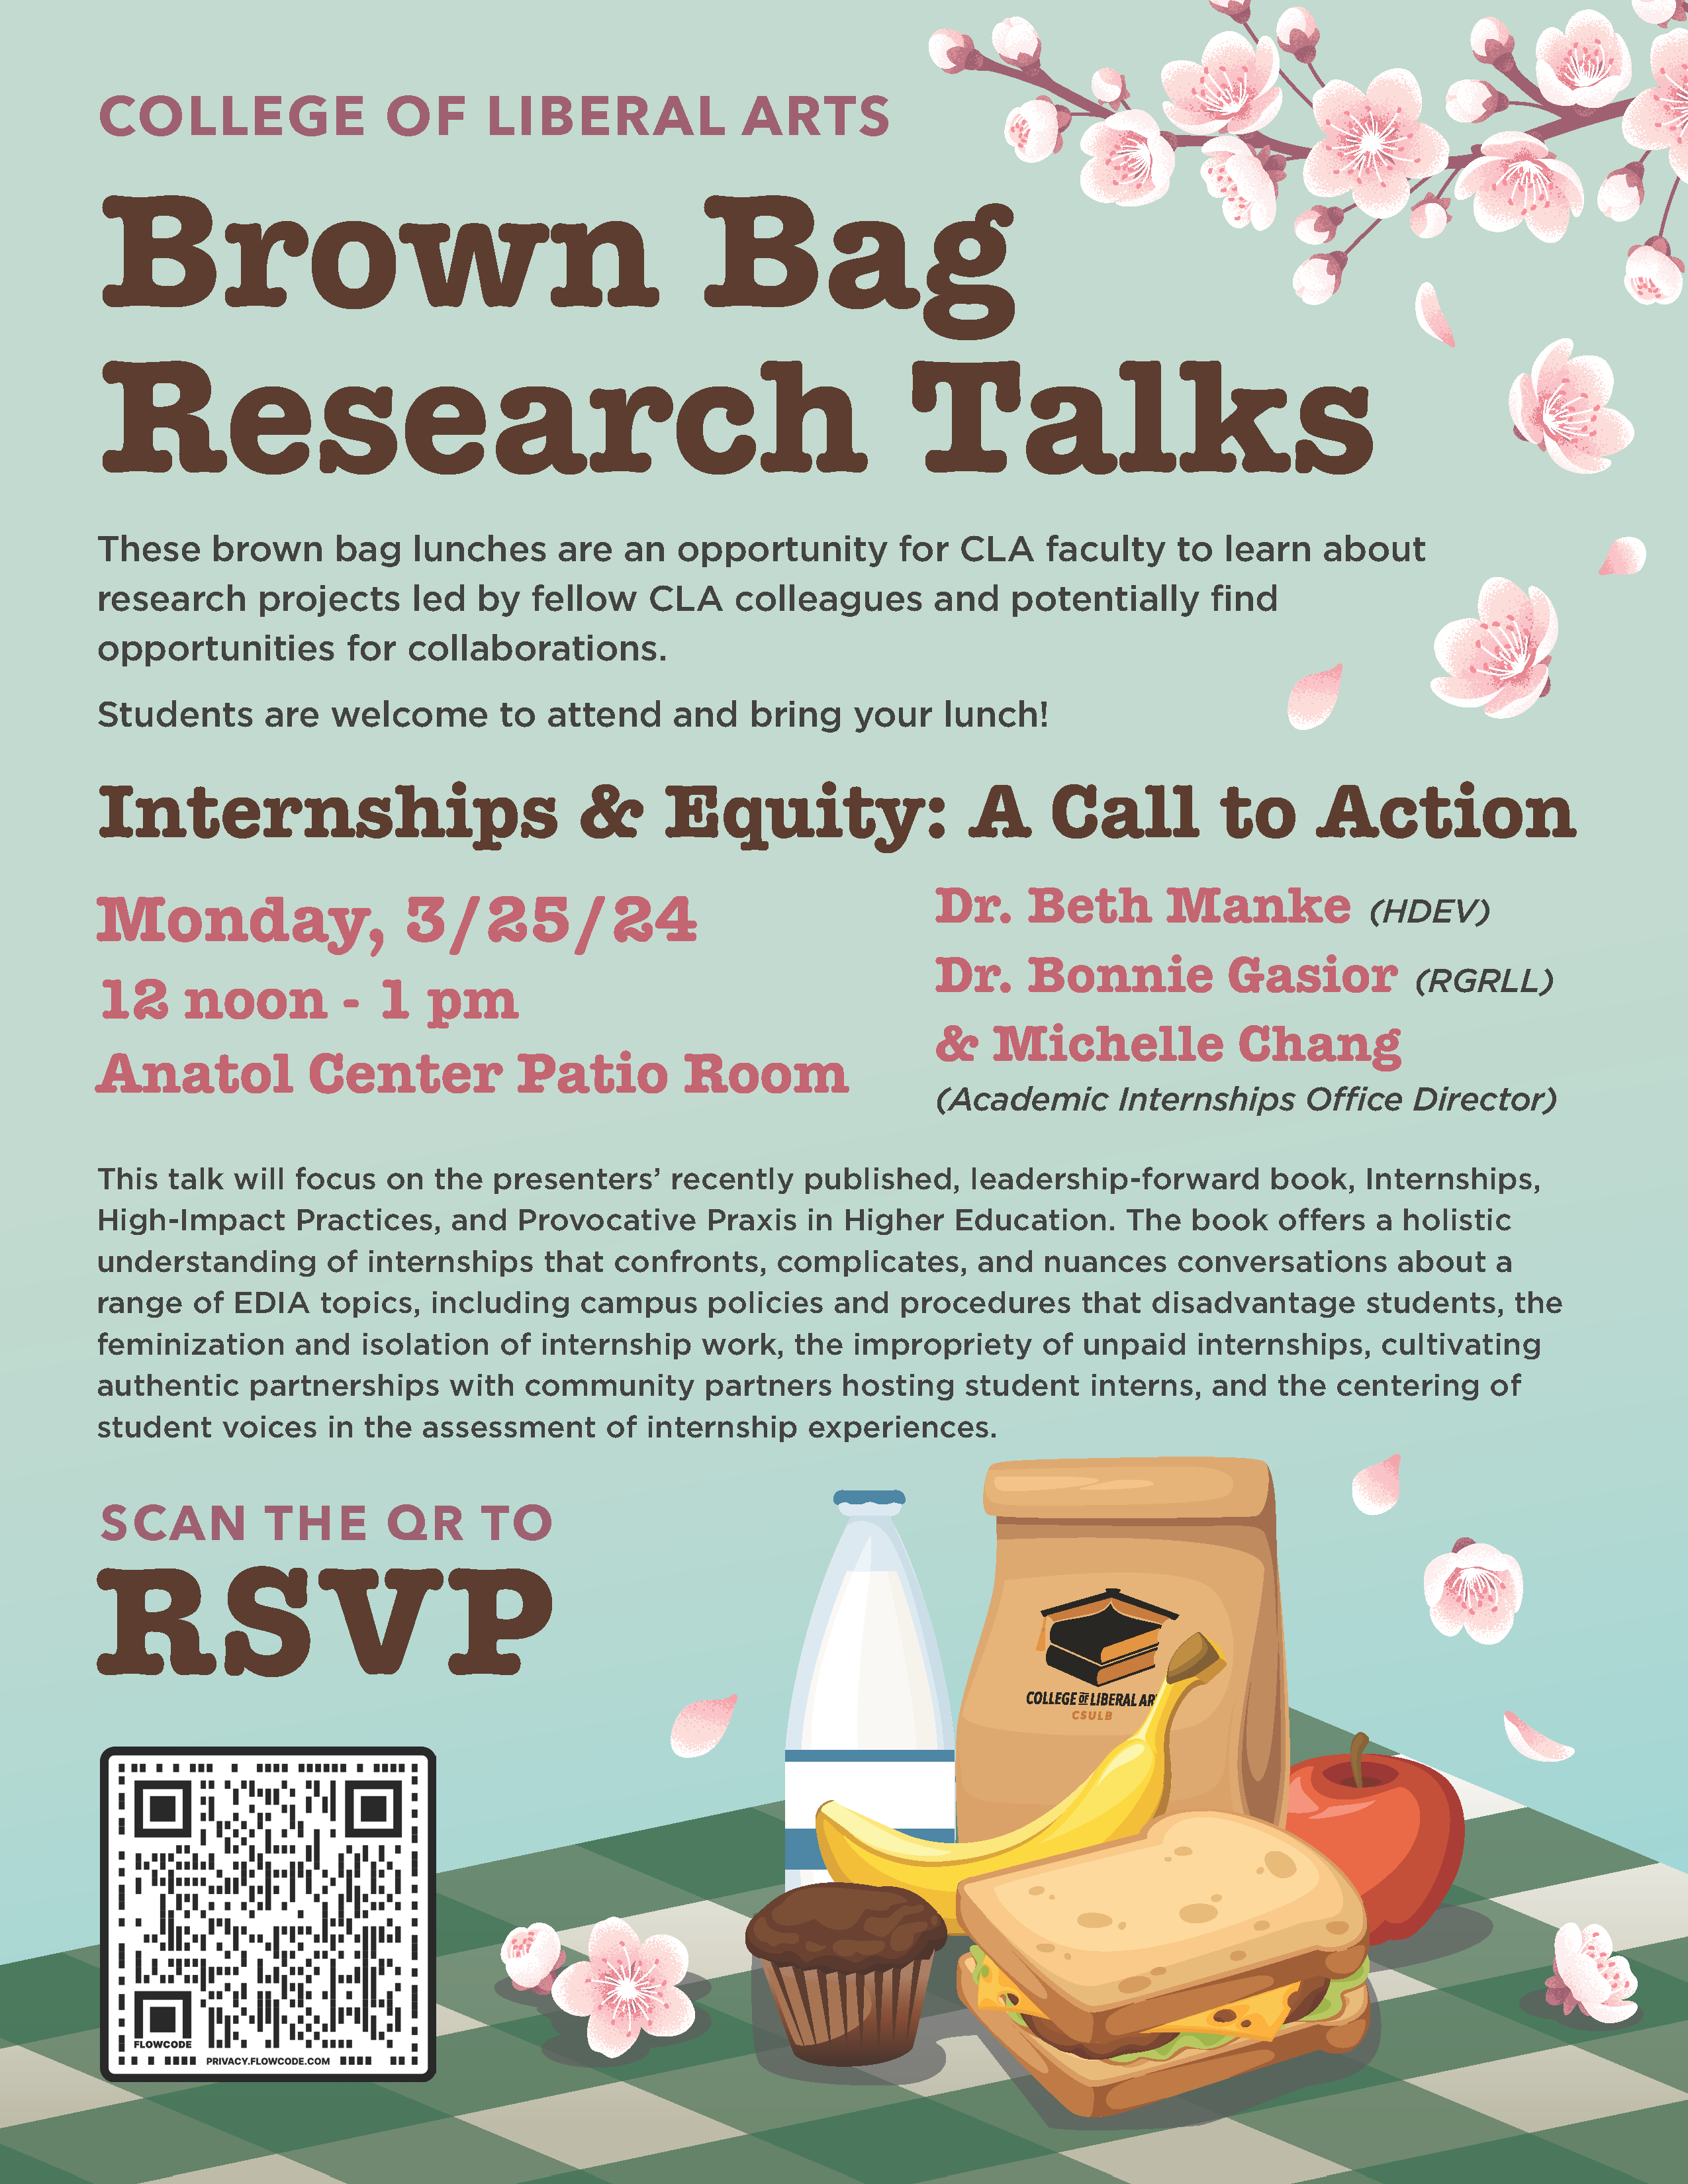 Brown Bag Research talks. Internships and equity. Monday march 25, 12-1 at the Anatol Patio